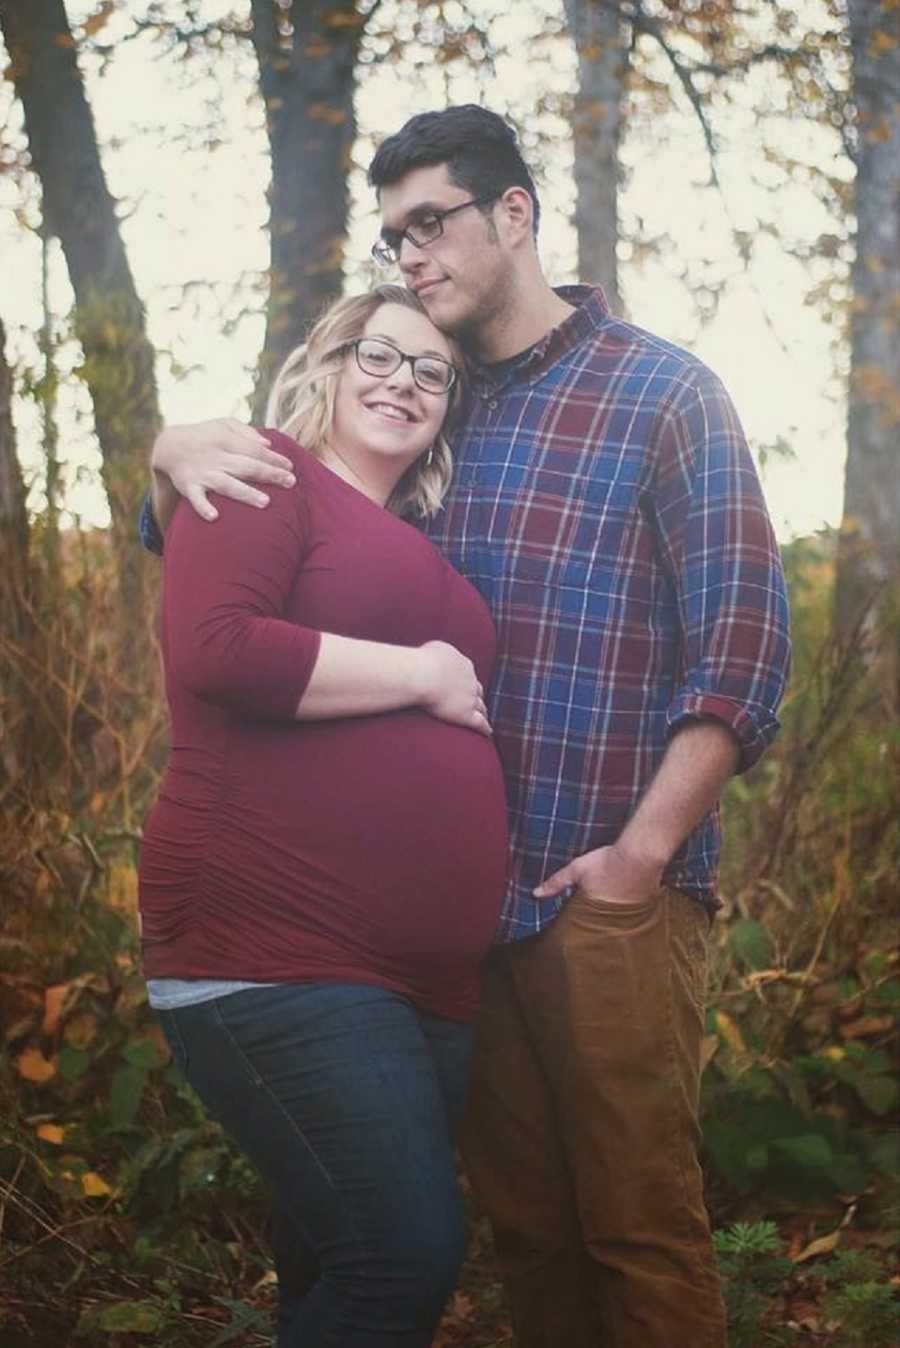 Pregnant woman with eating disorder stands smiling in wooded area with husband